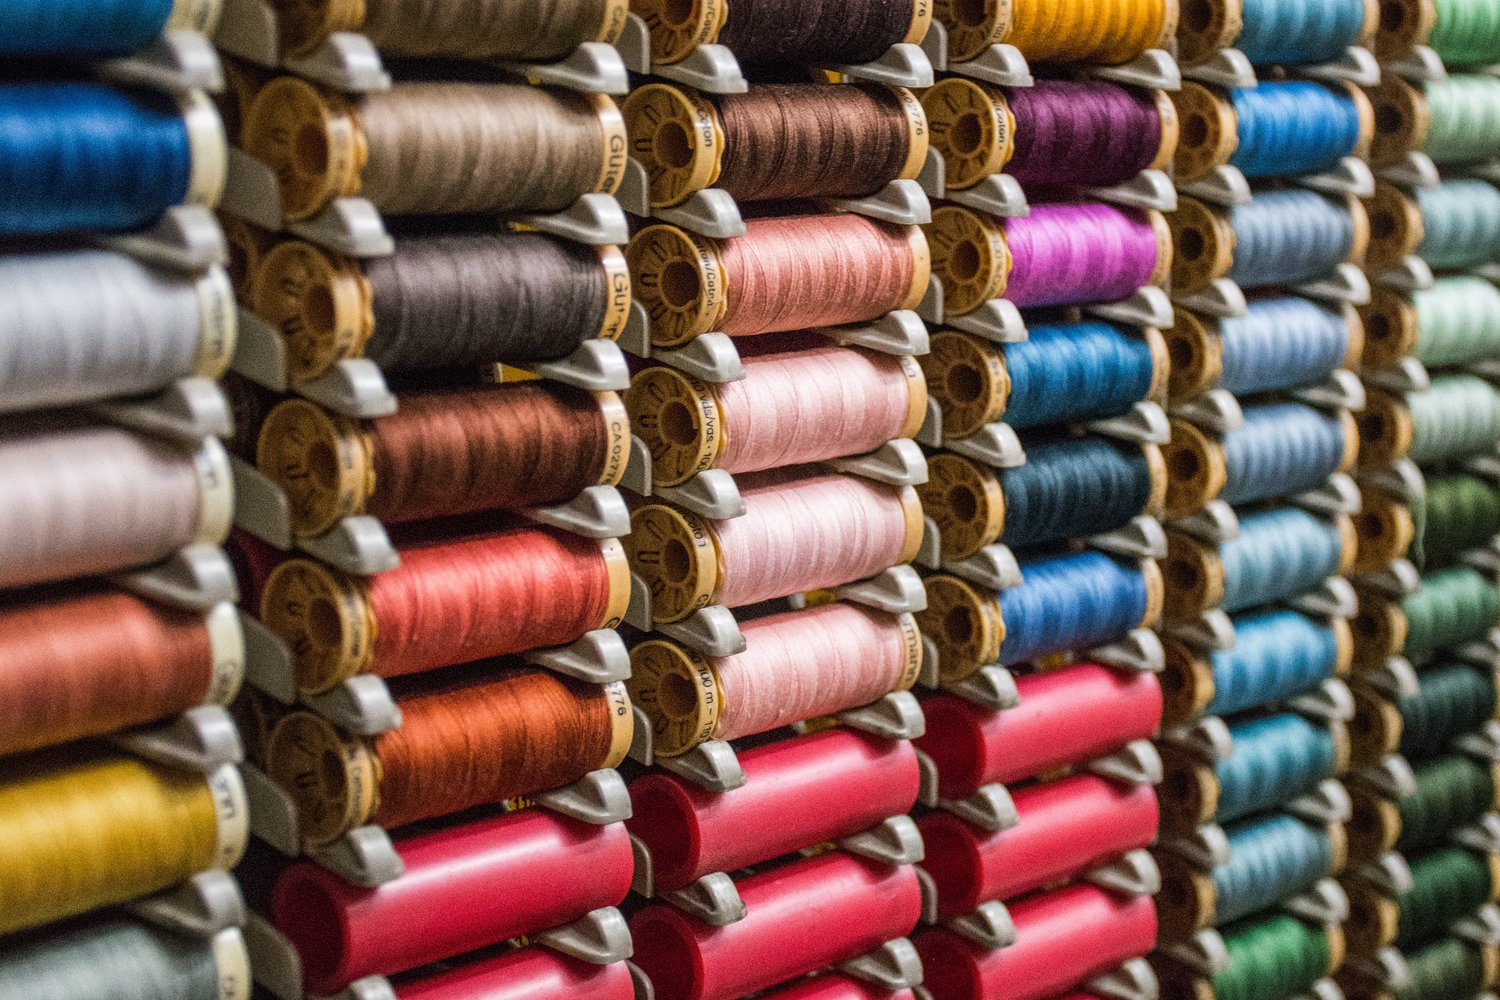 Spools of Thread on a stand in a store - Photo by Hector J Rivas